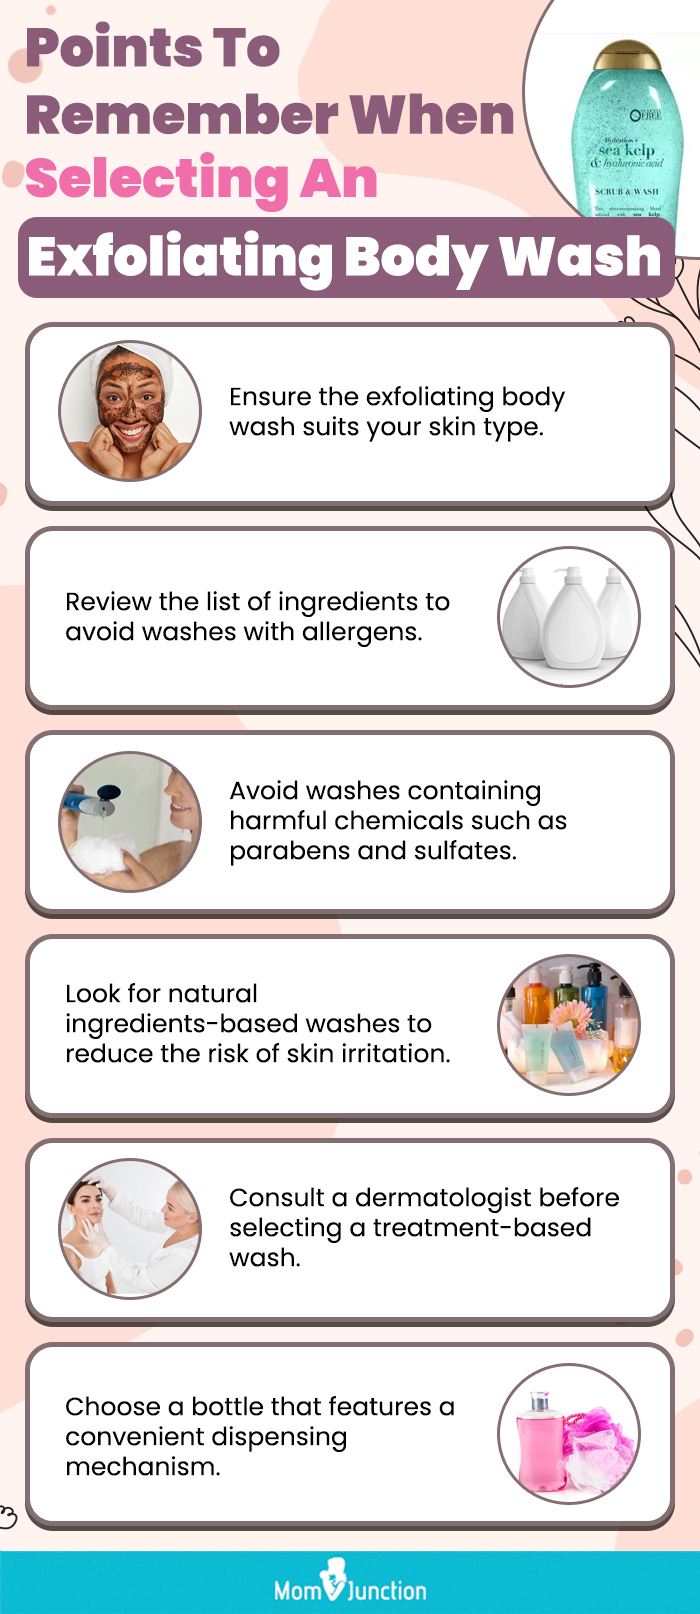 Points To Remember When Selecting The Right Exfoliating Body Wash (infographic)